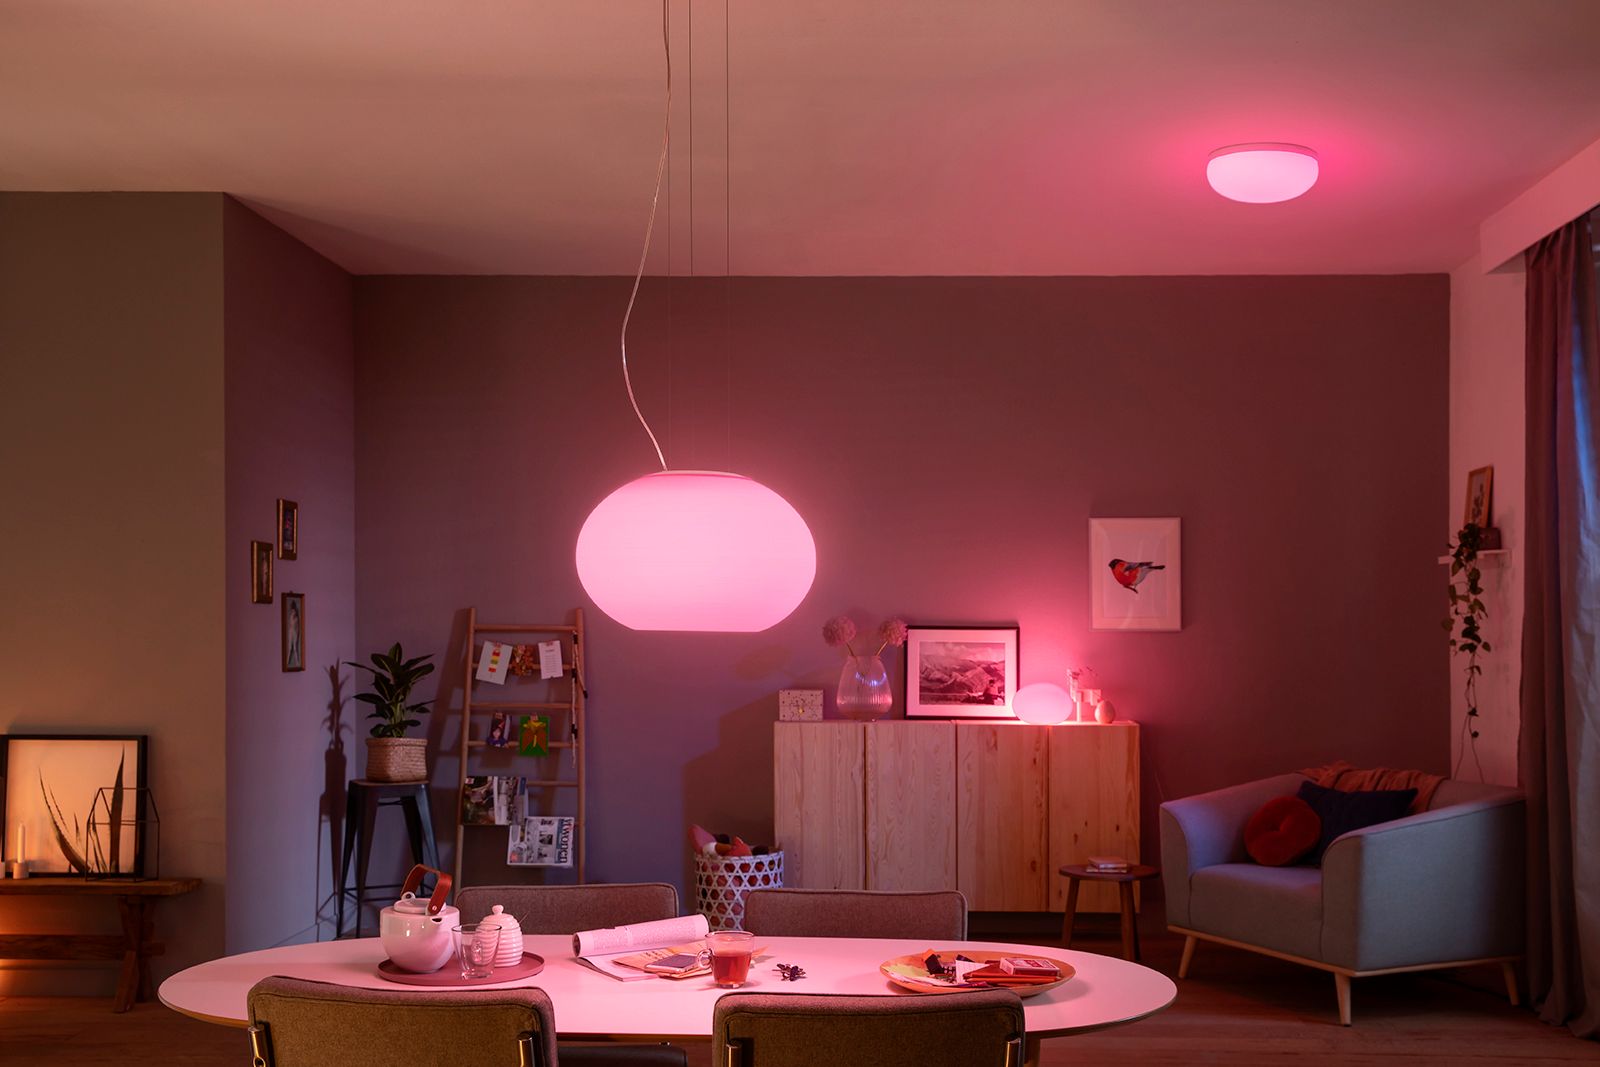  Philips Hue 2-Pack Premium Smart Light Starter Kit, 16 million  colors, for most lamps & overhead lights, Works with Alexa, Apple HomeKit  and Google Assistant, Soft White : Everything Else